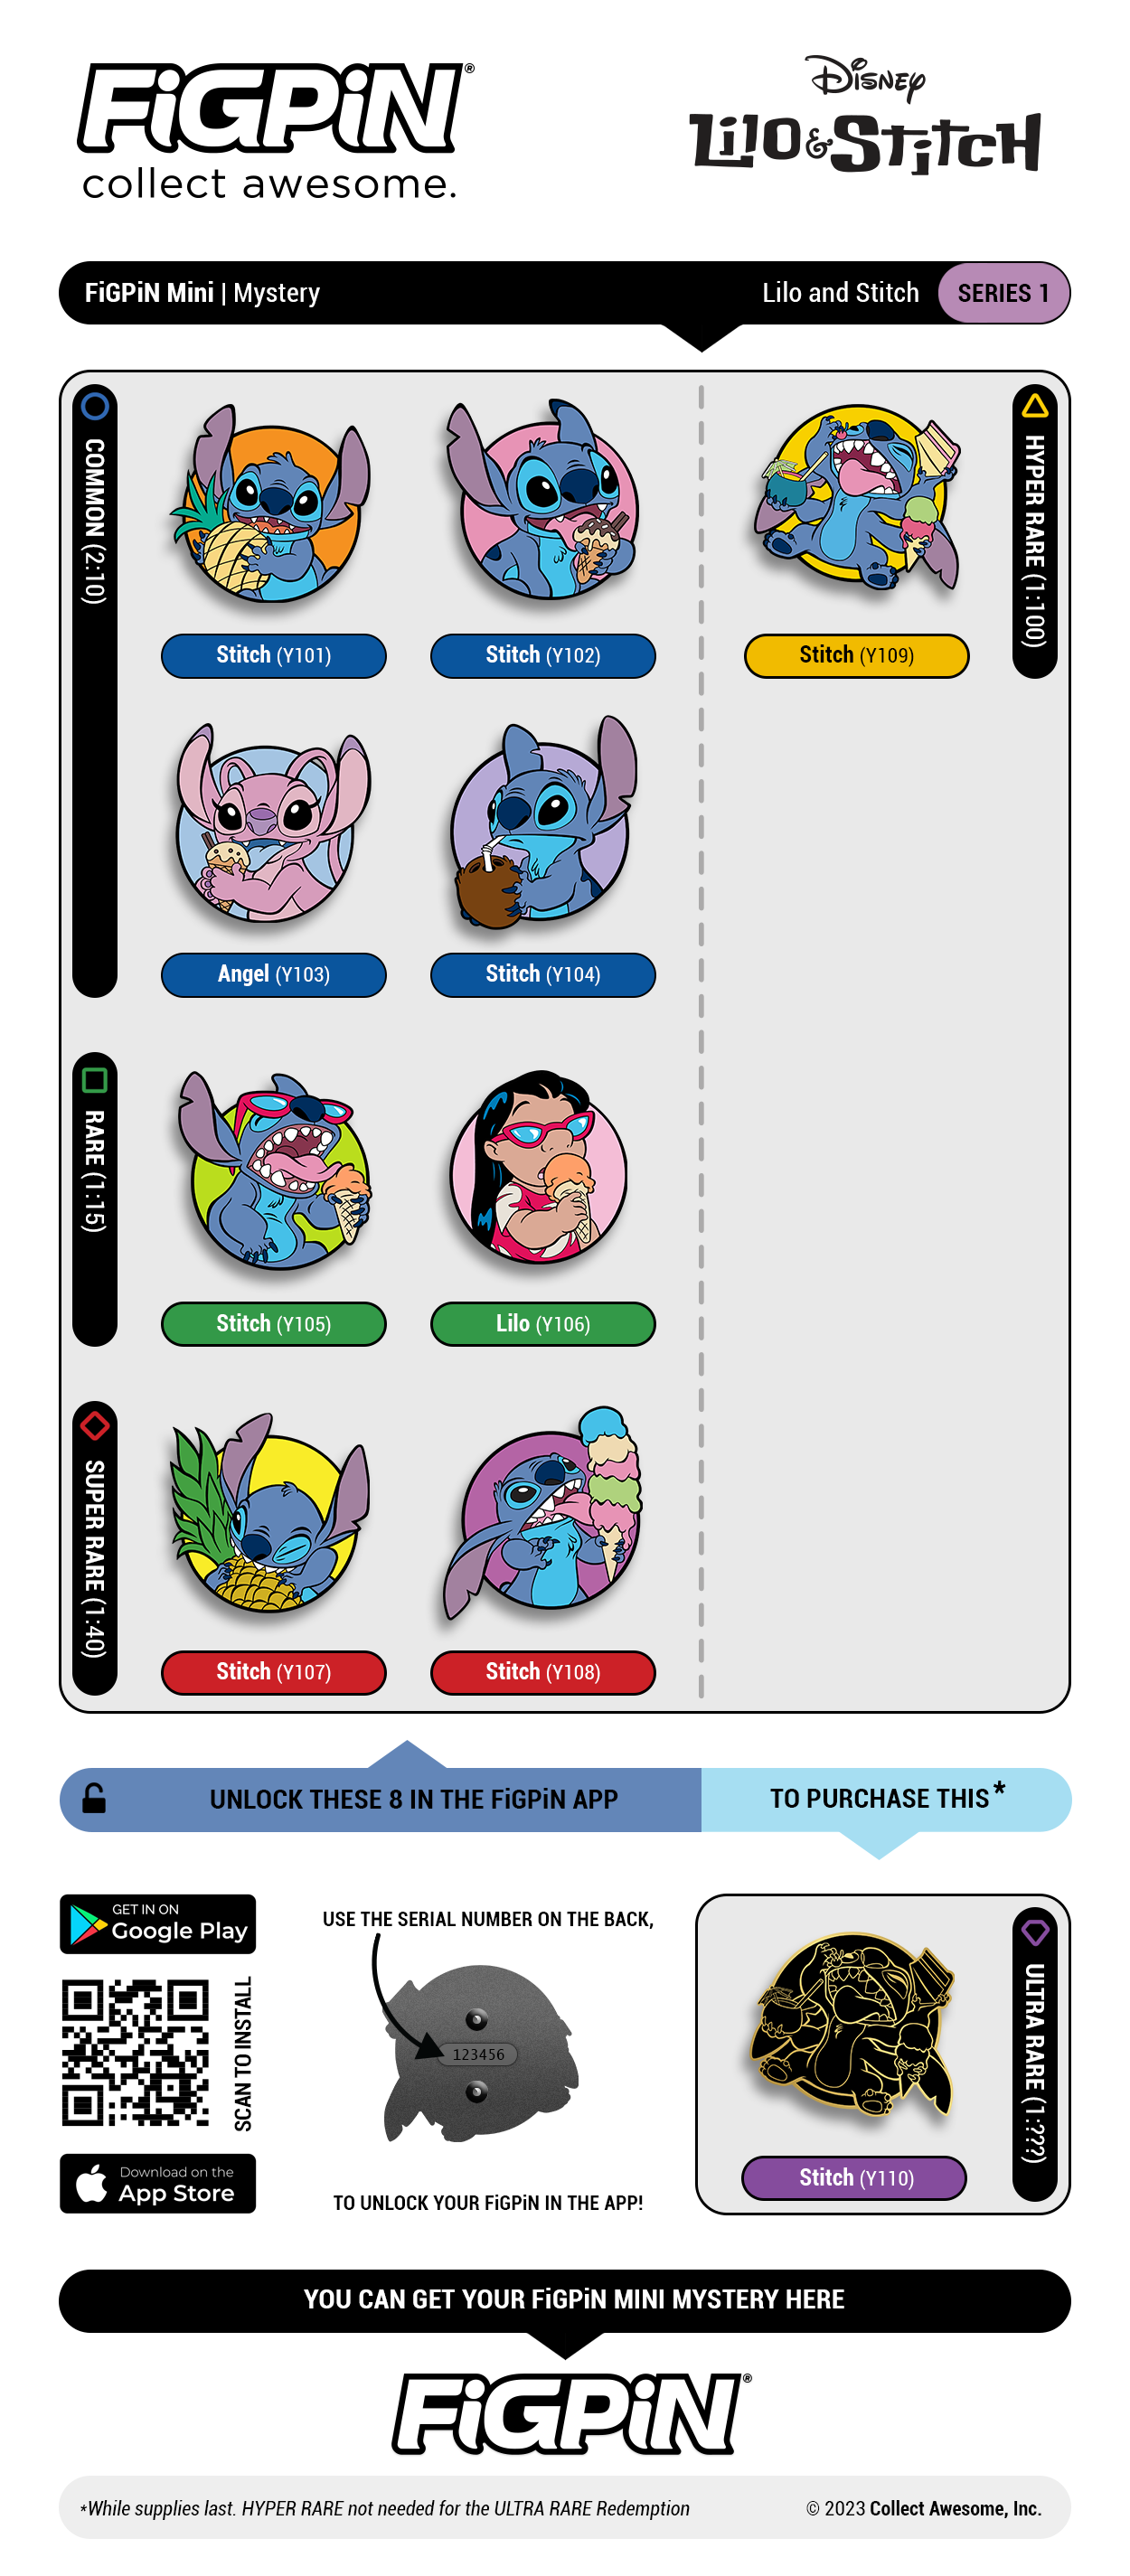 Collector guide of the Disney's Lilo and Stitch Series 01 FiGPiN Mystery Minis